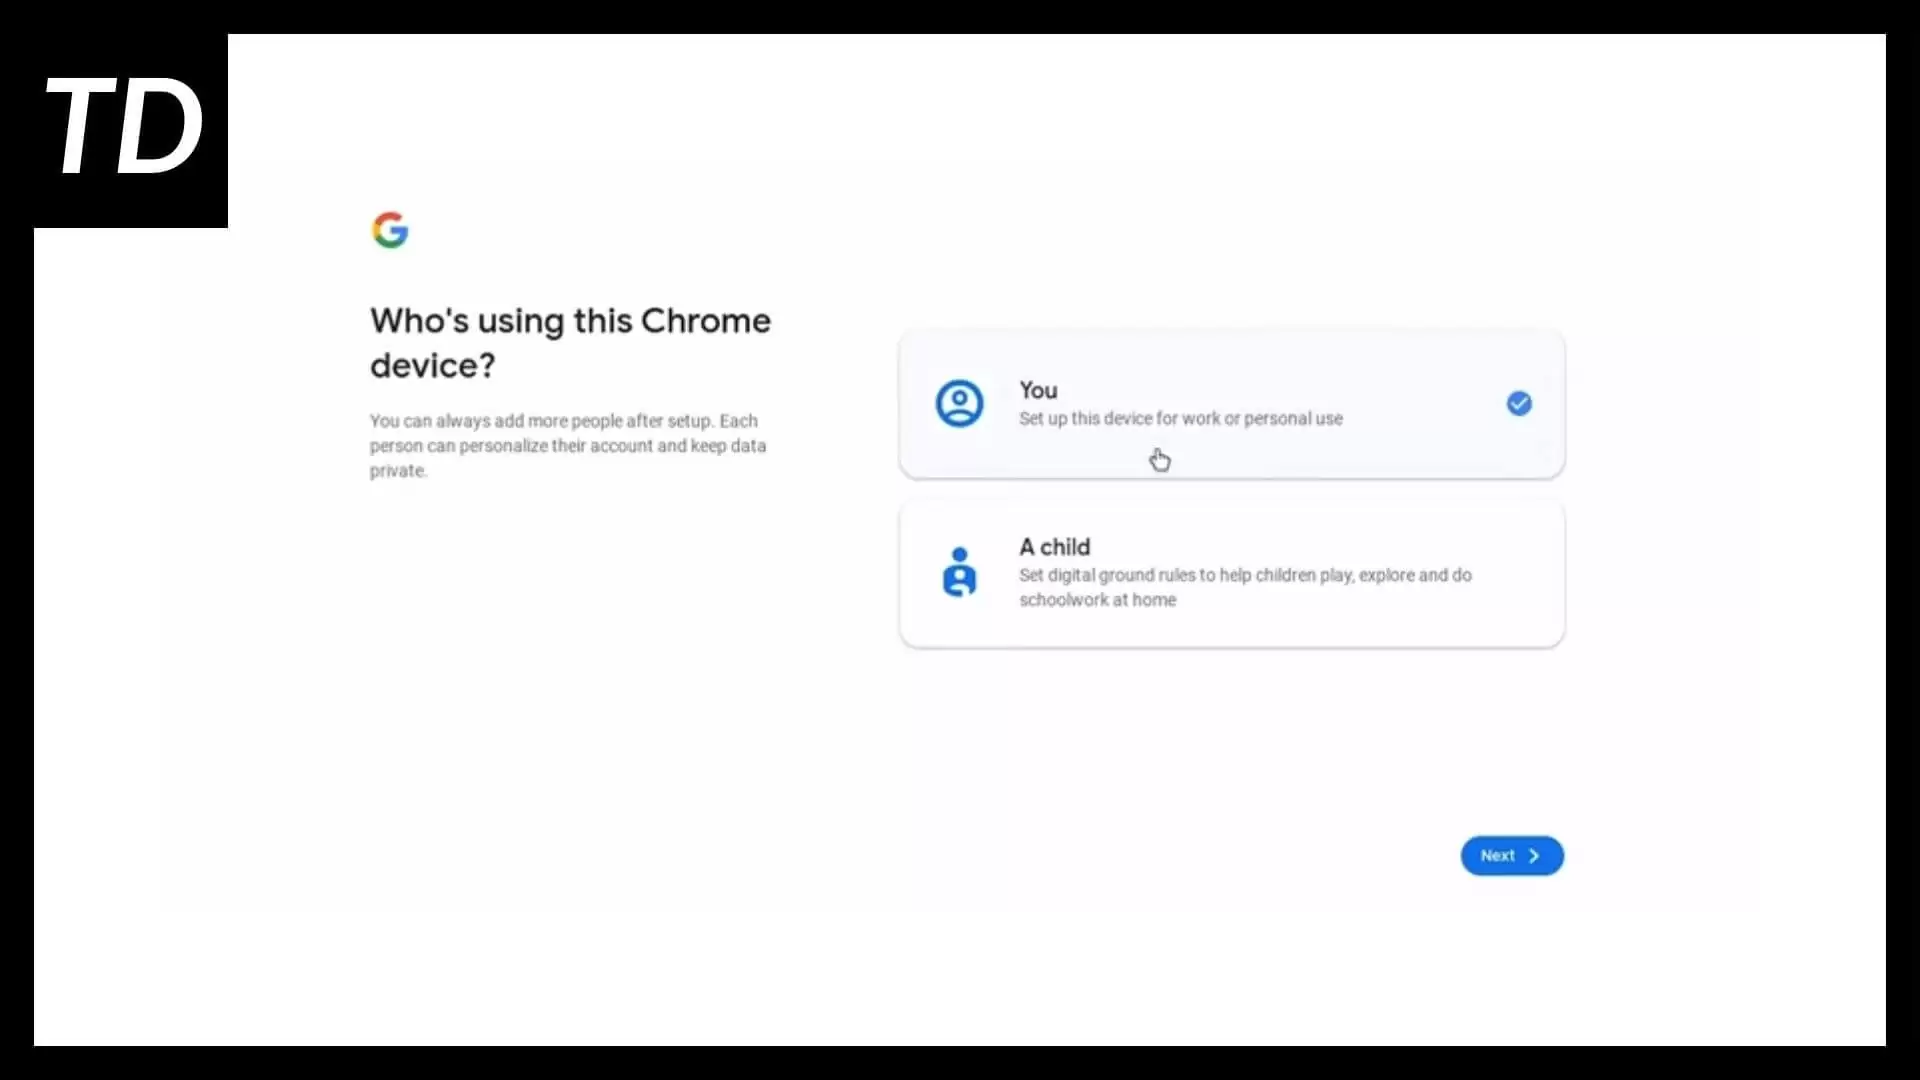 Chrome OS Flex prompting to setup a normal account or a child account